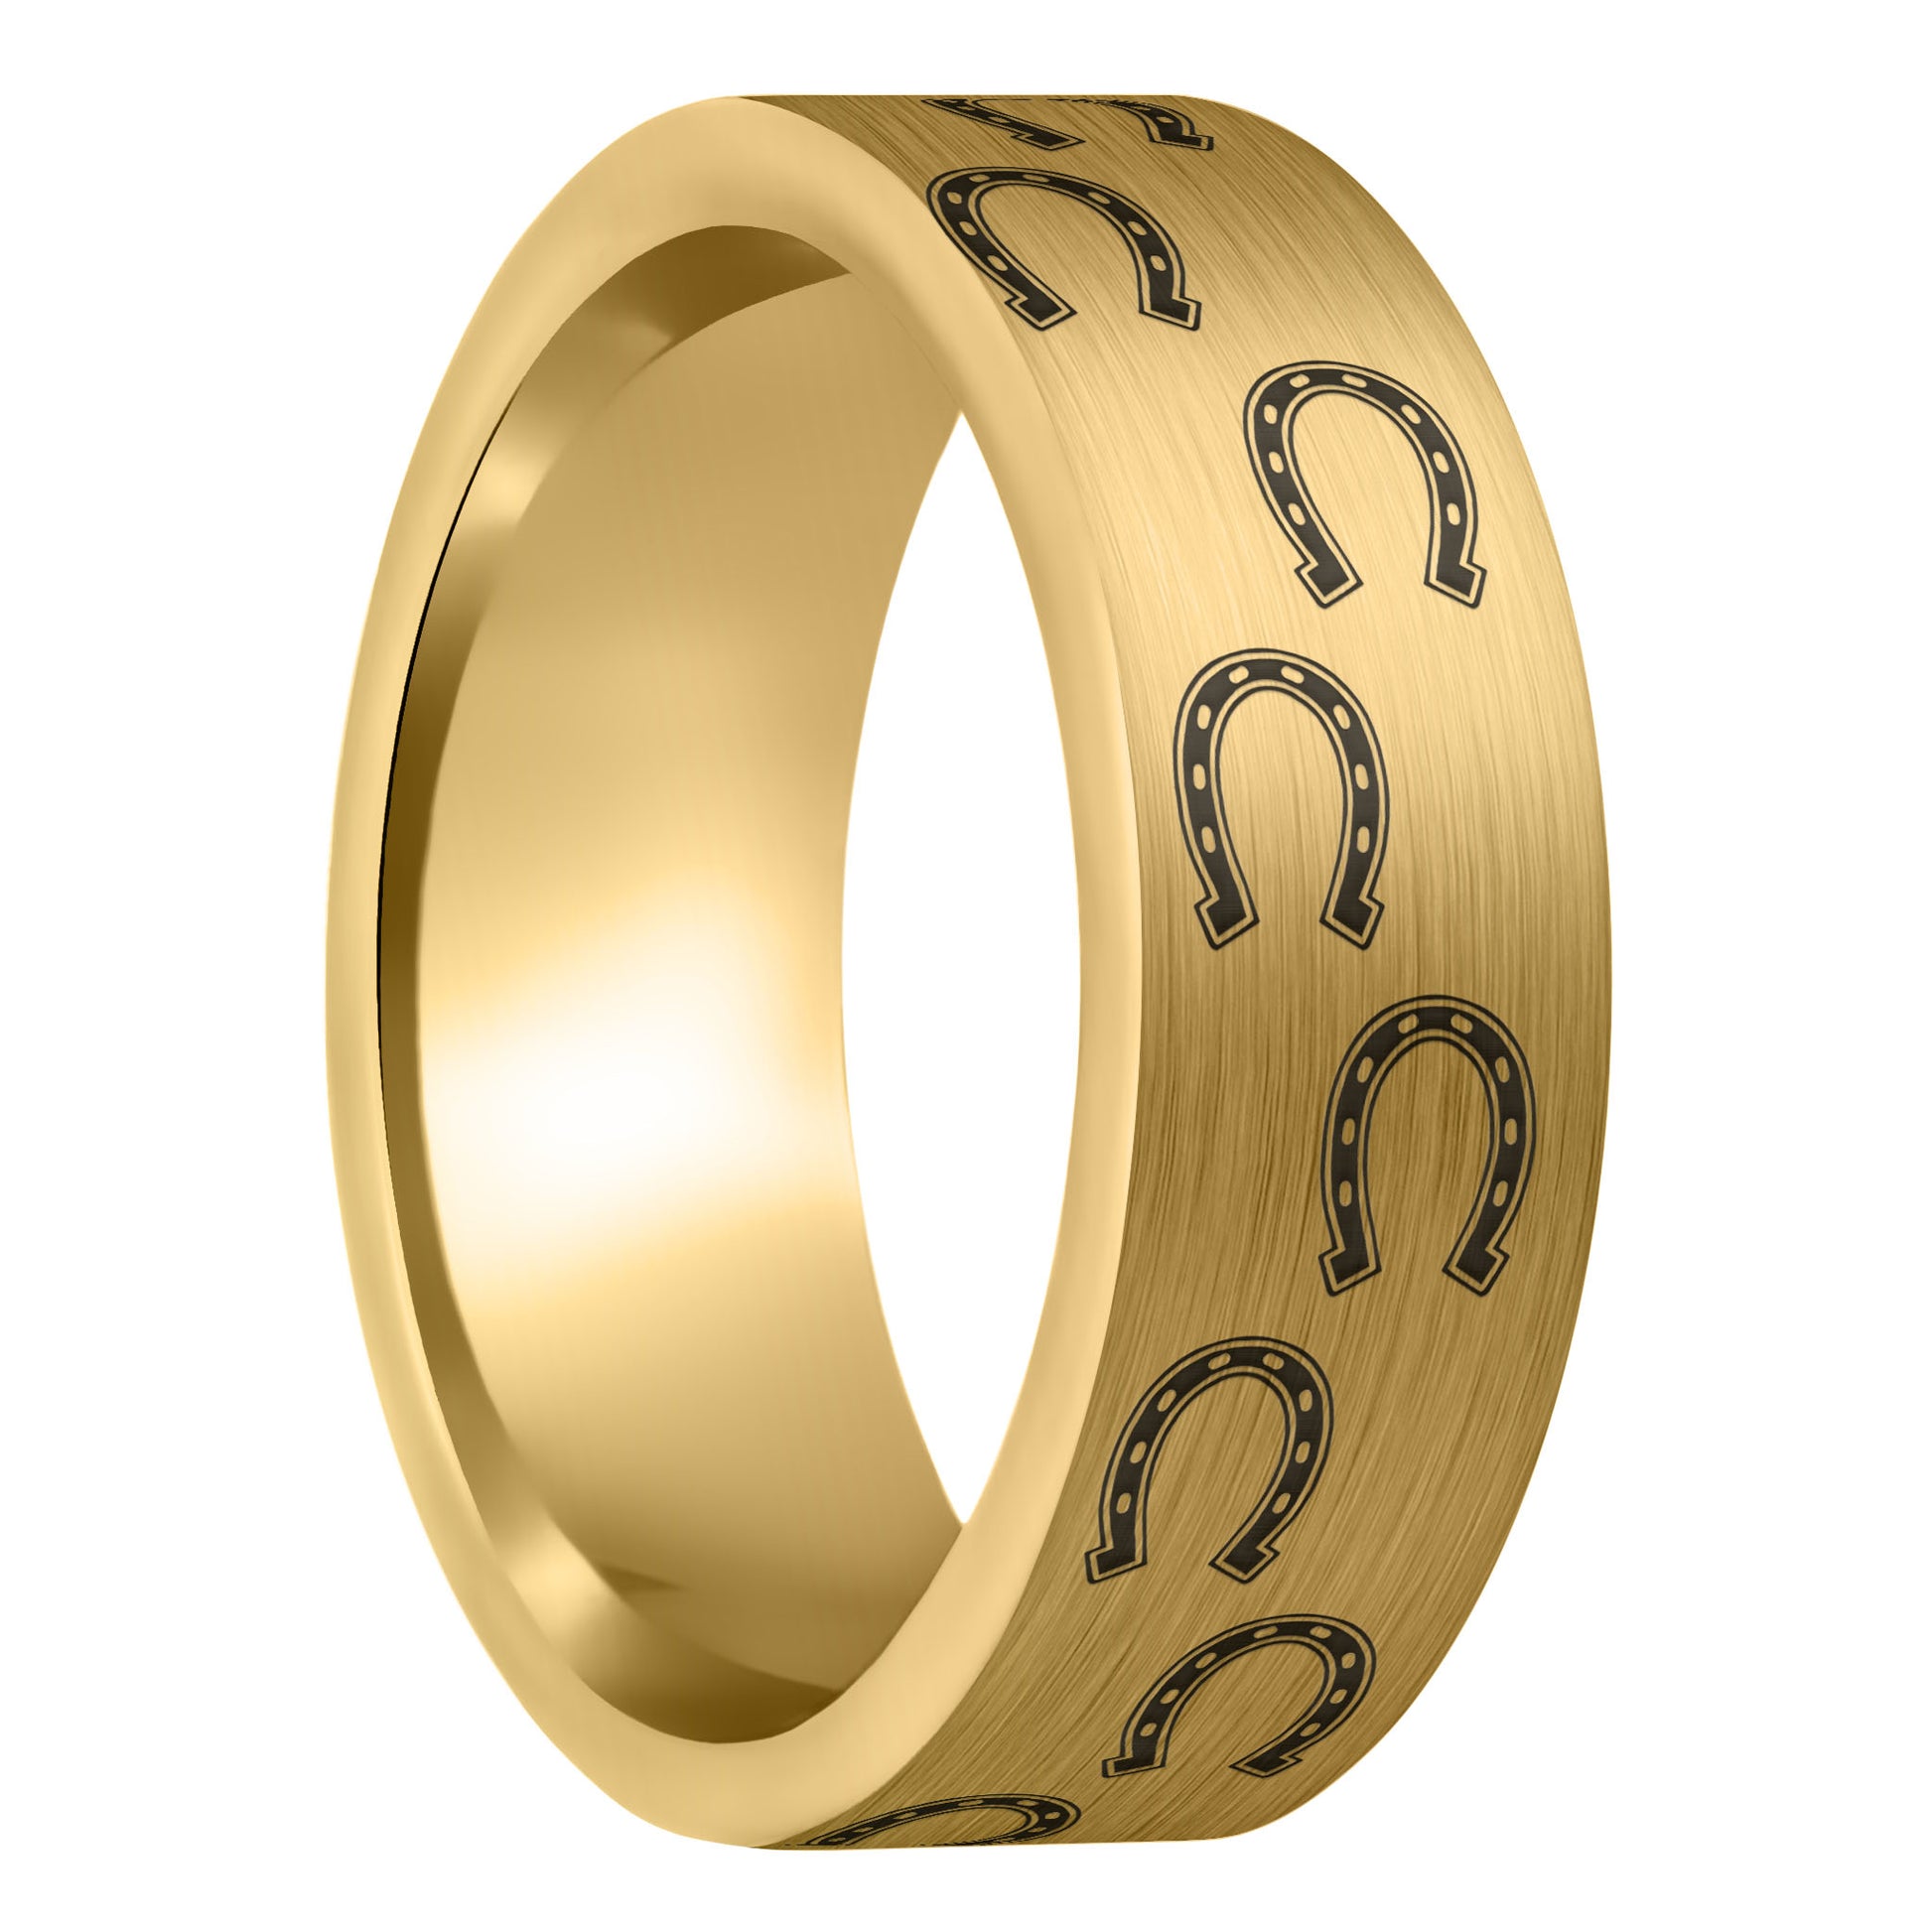 A horseshoes brushed gold tungsten men's wedding band displayed on a plain white background.